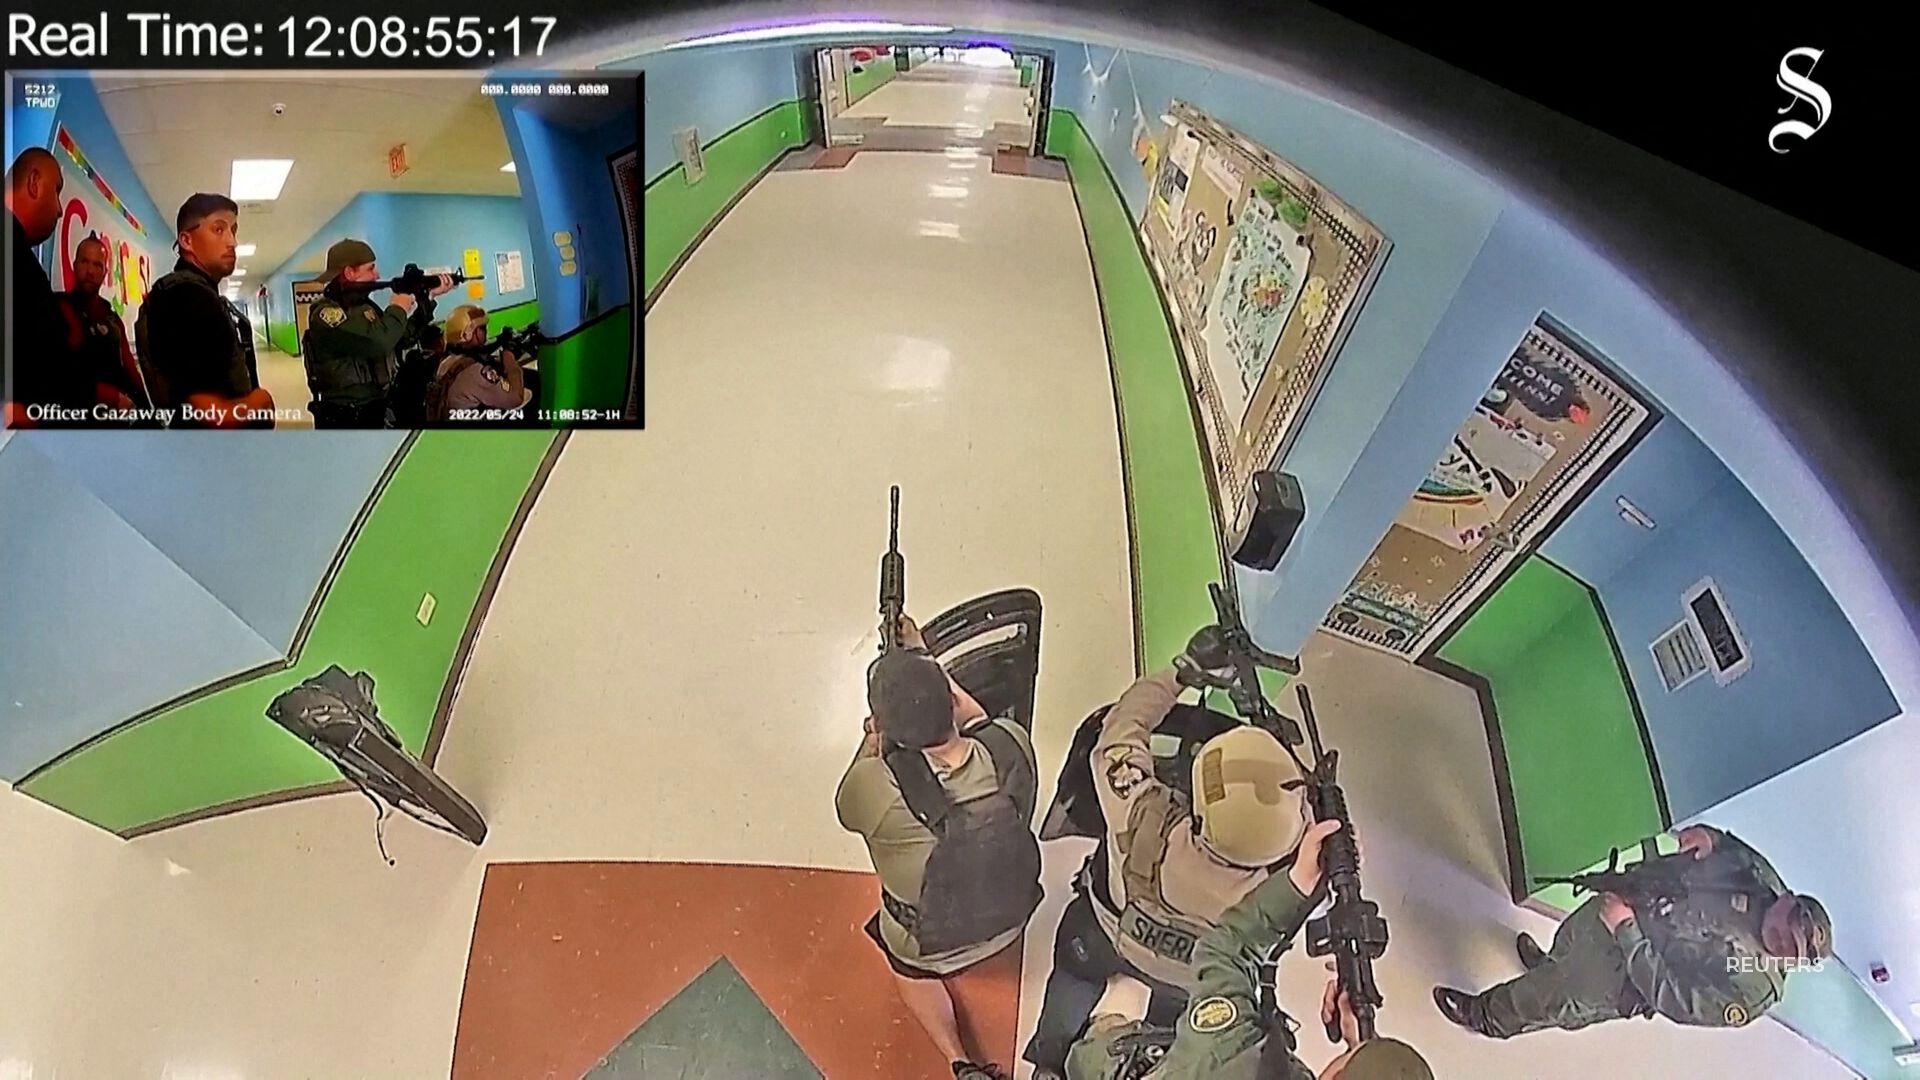 In newly released video, a surveillance camera captures the Uvalde school shooter entering the classroom where 19 children and two teachers died.